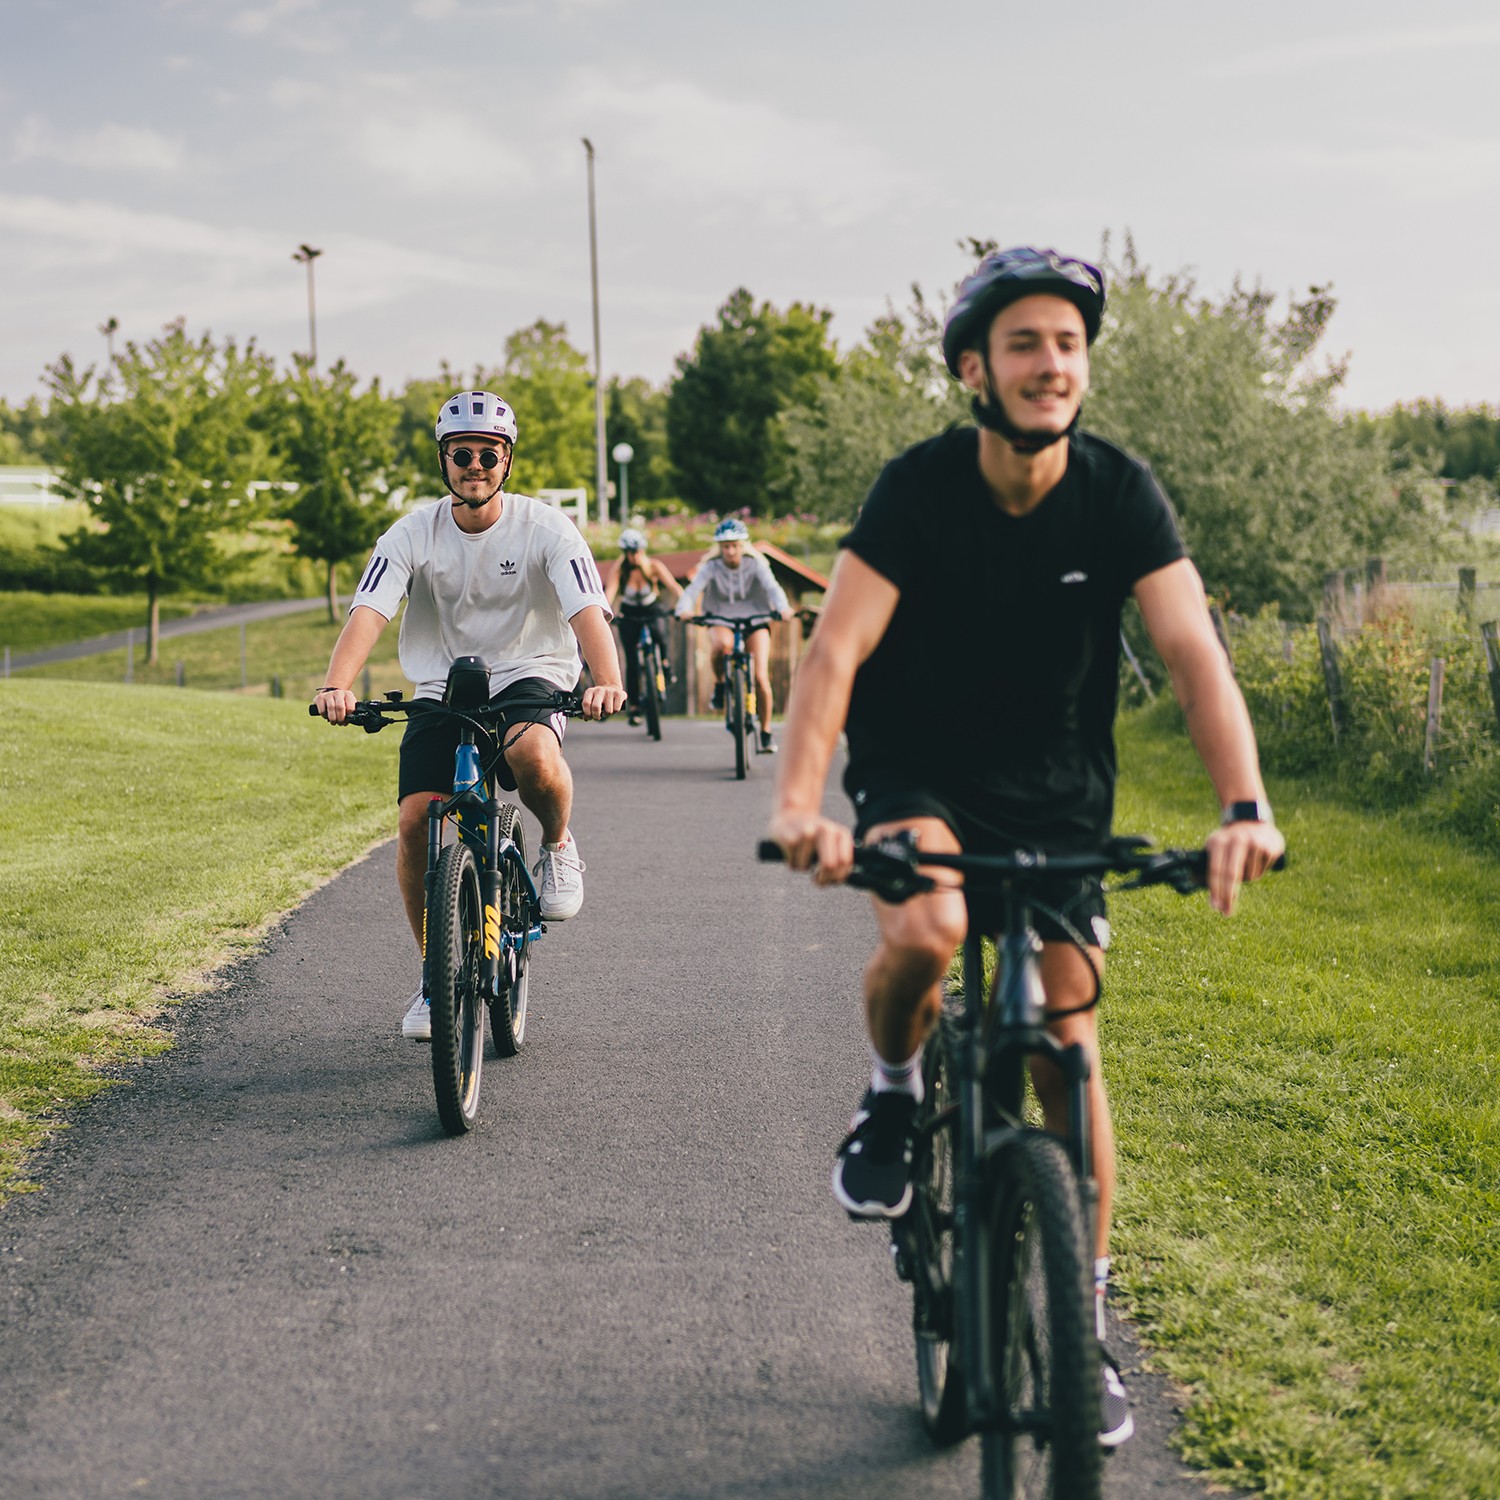 Reiters hotels - Group excursion by bike